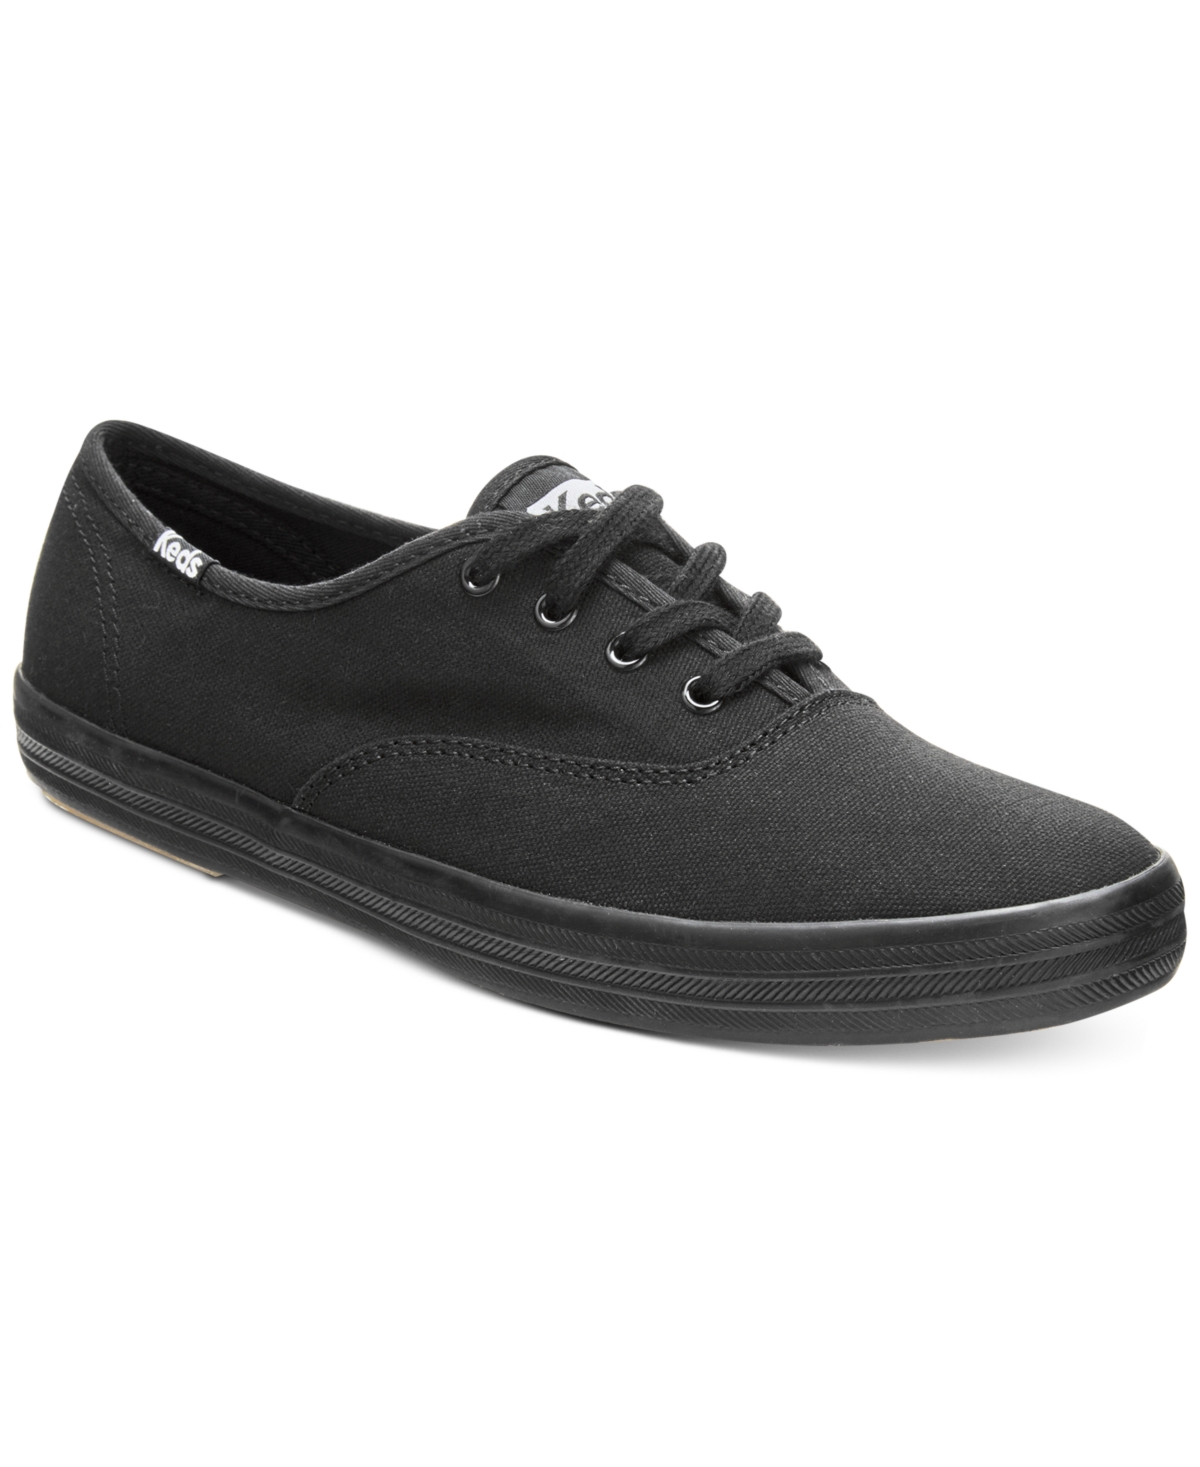 UPC 044208122720 product image for Keds Women's Champion Ortholite Lace-Up Oxford Fashion Sneakers from Finish Line | upcitemdb.com